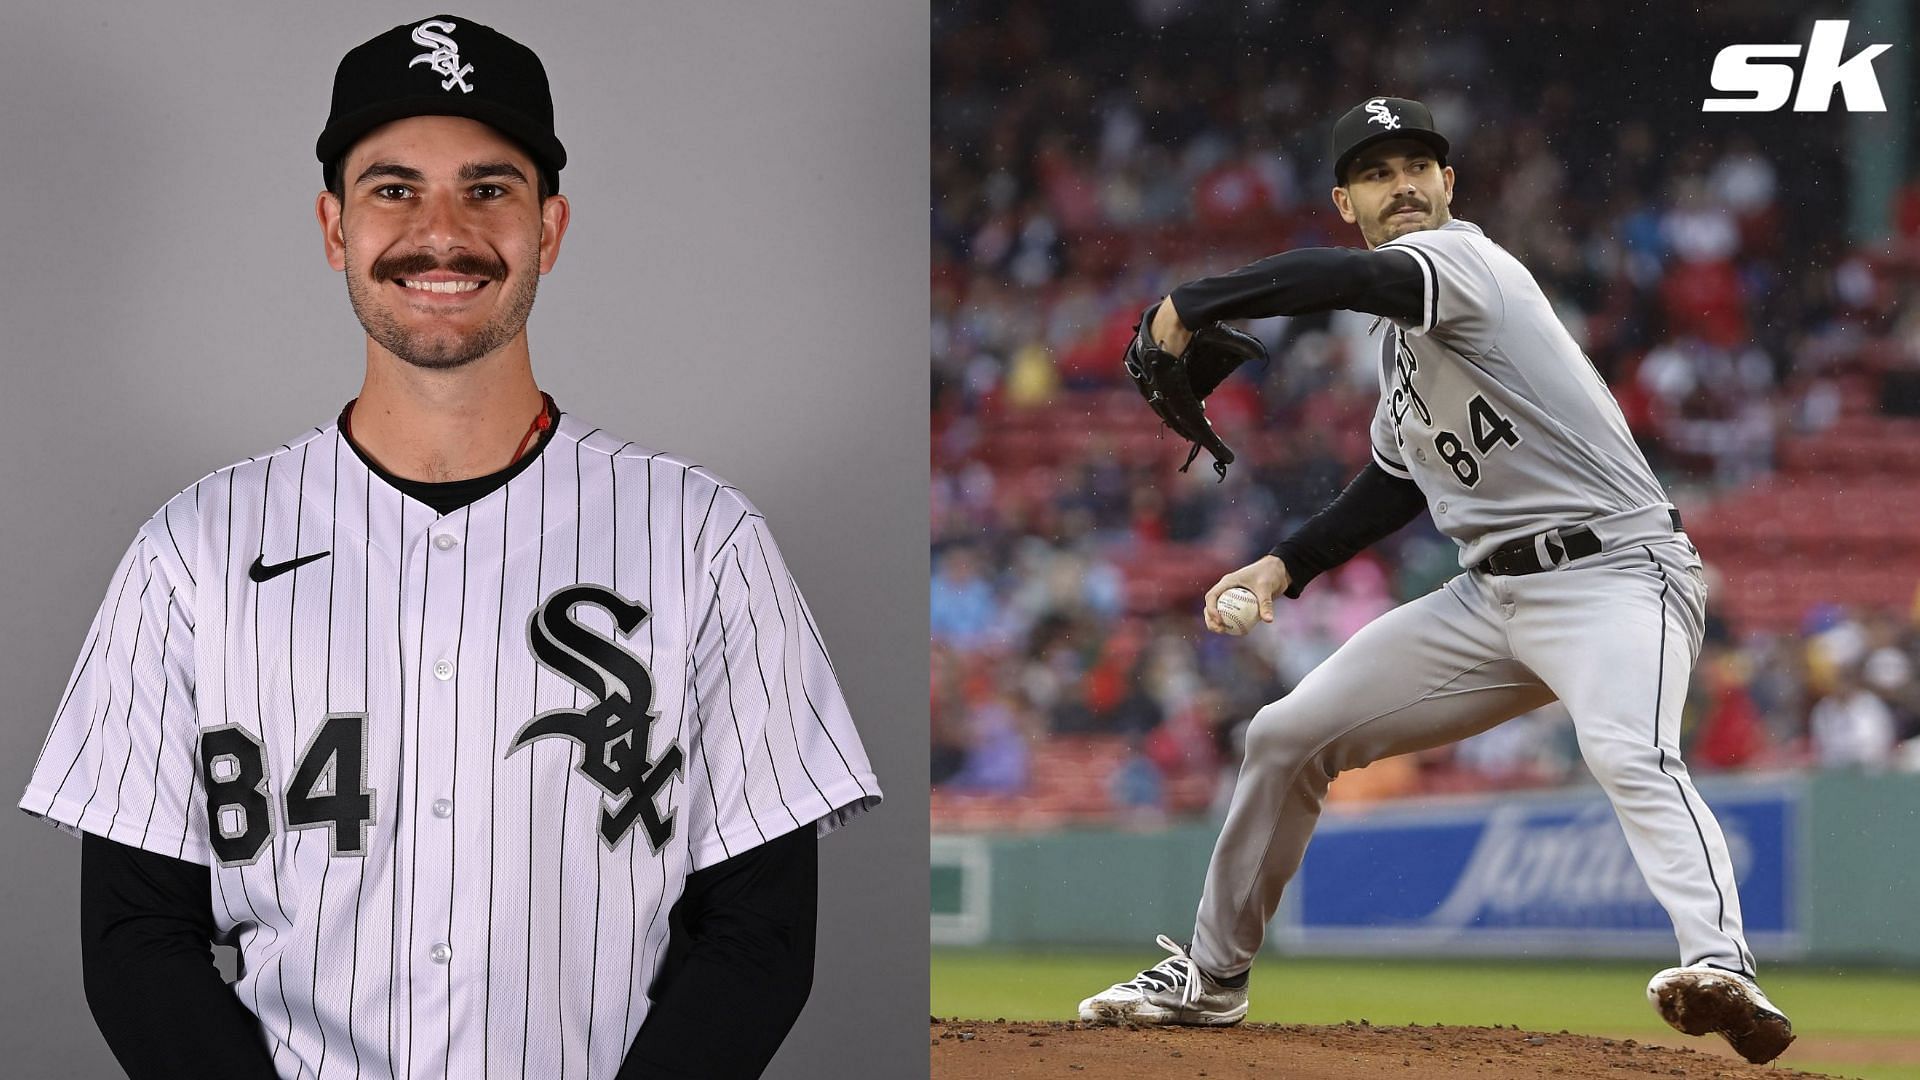 The San Diego Padres are finalizing a deal to acquire Dylan Cease from the Chicago White Sox